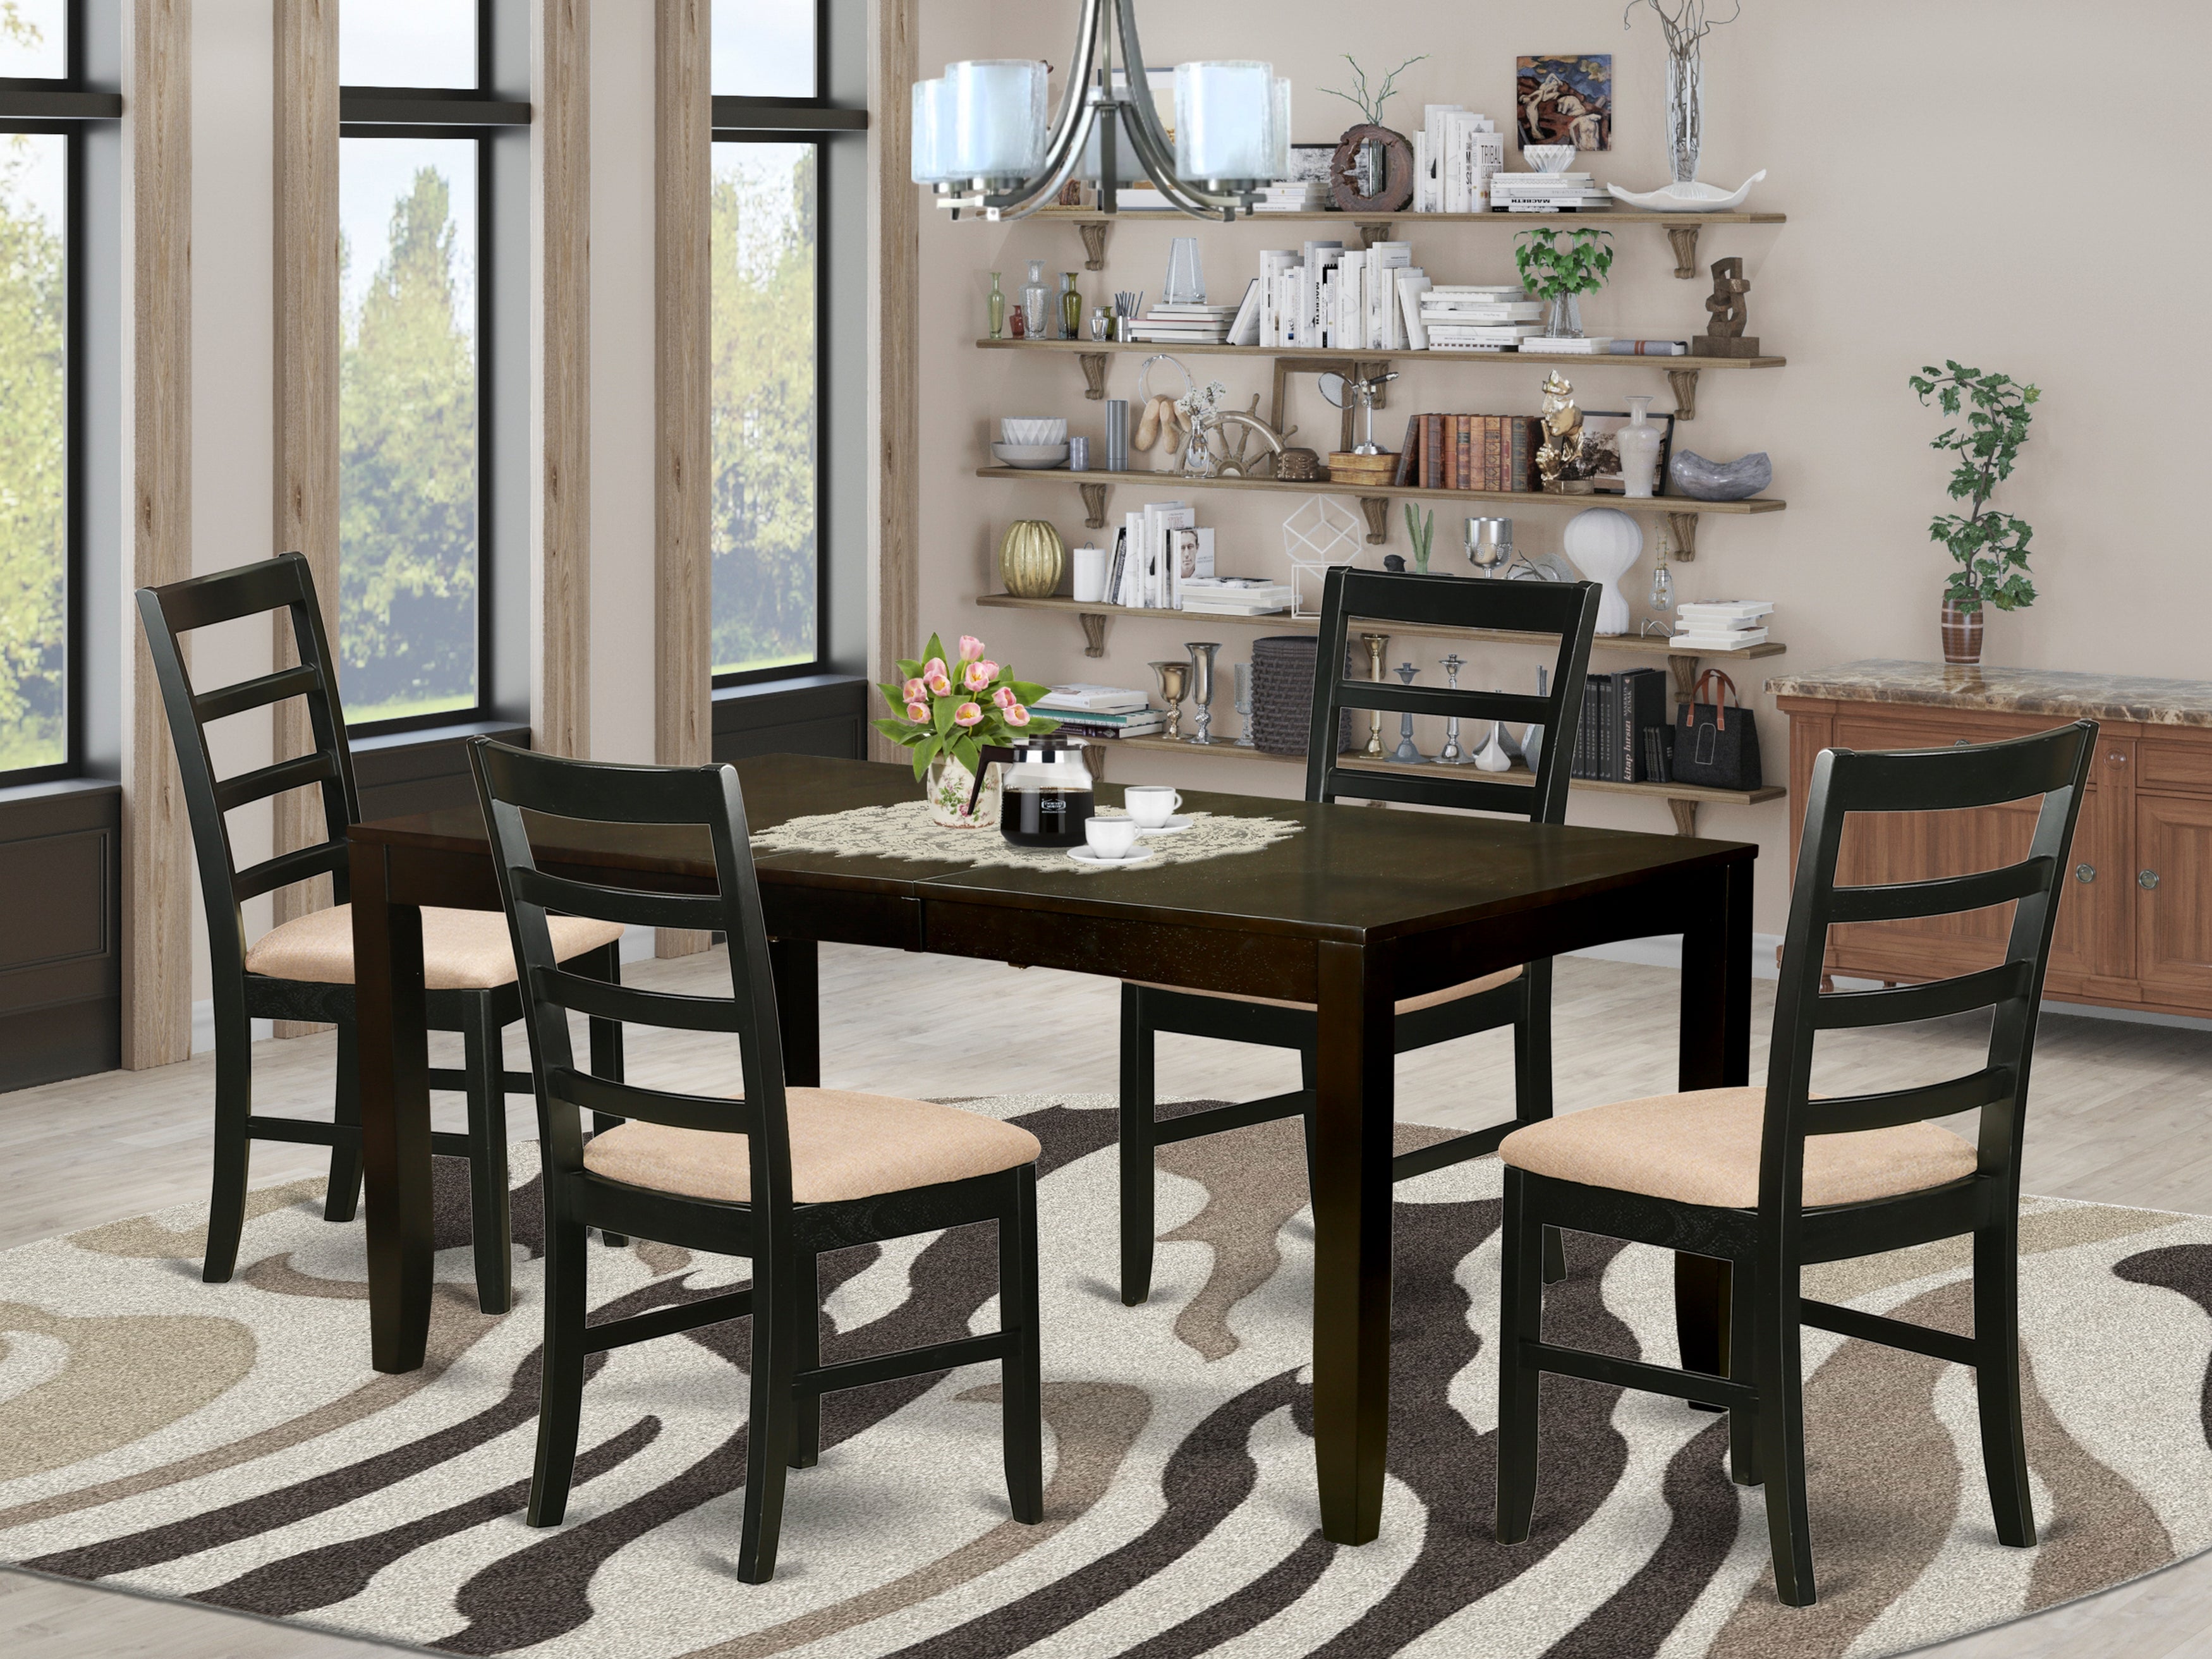 LYPF5-CAP-C 5 Pc Dining room set for 4-Table with Leaf and 4 Chairs for Dining room